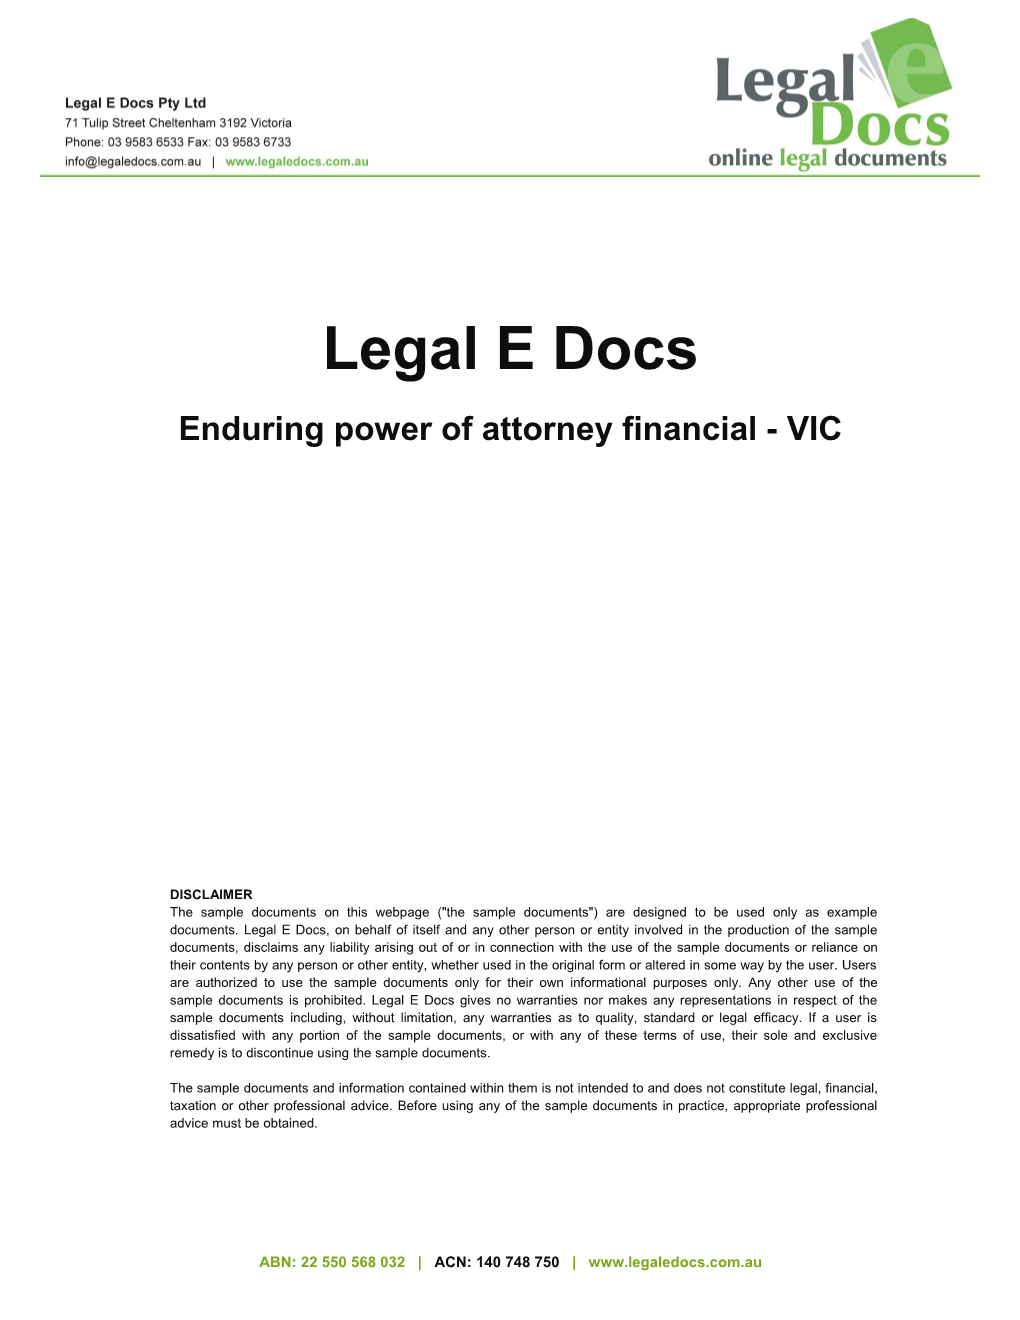 Enduring Power of Attorney (Financial)